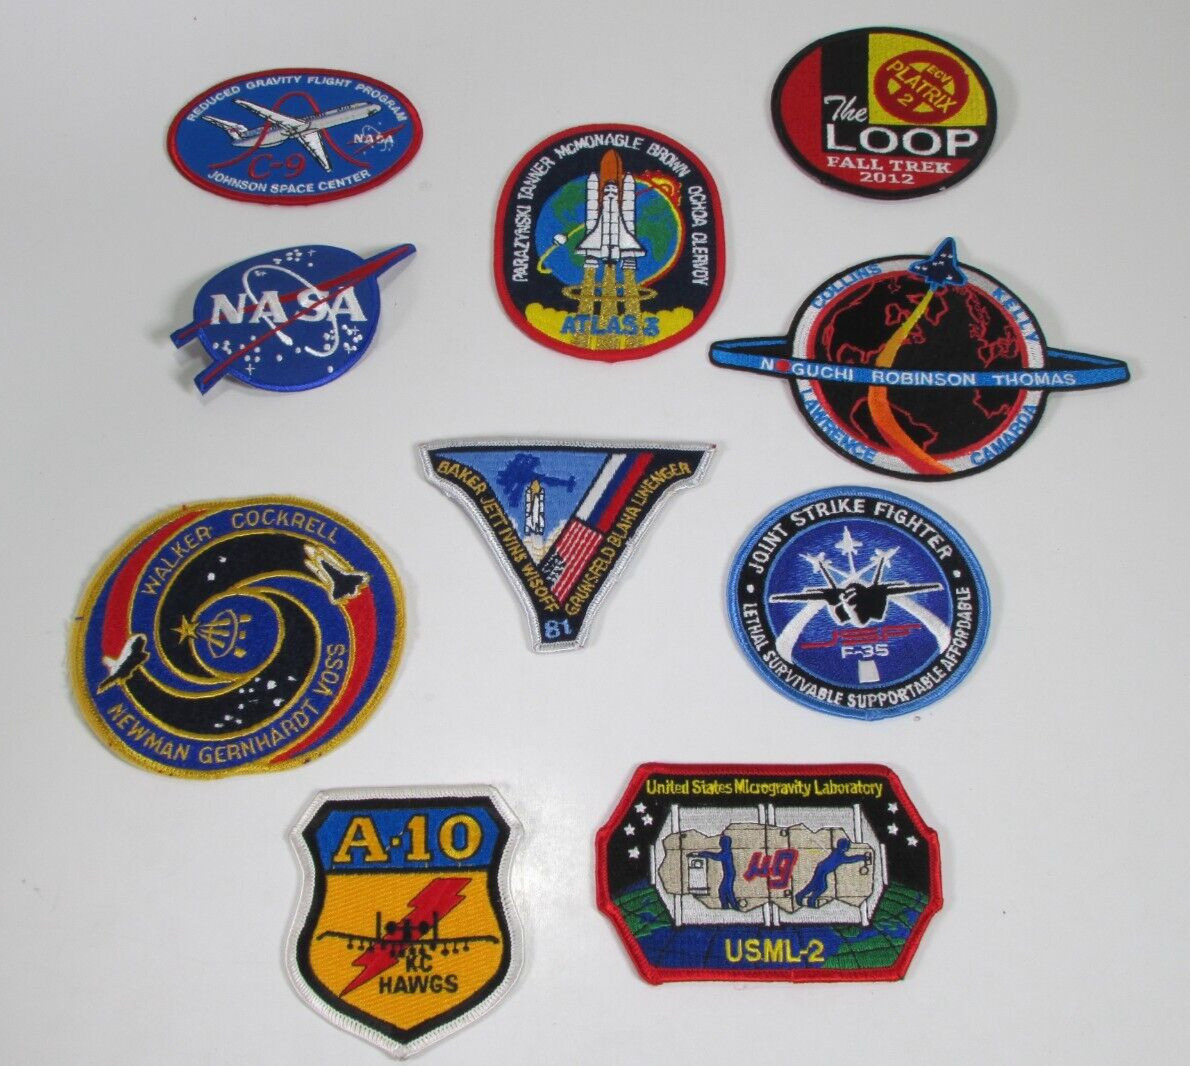 NASA Johnson Space Center, Joint Strike Fighter F-35, A-10 KC Hawgs Patch Lot 10